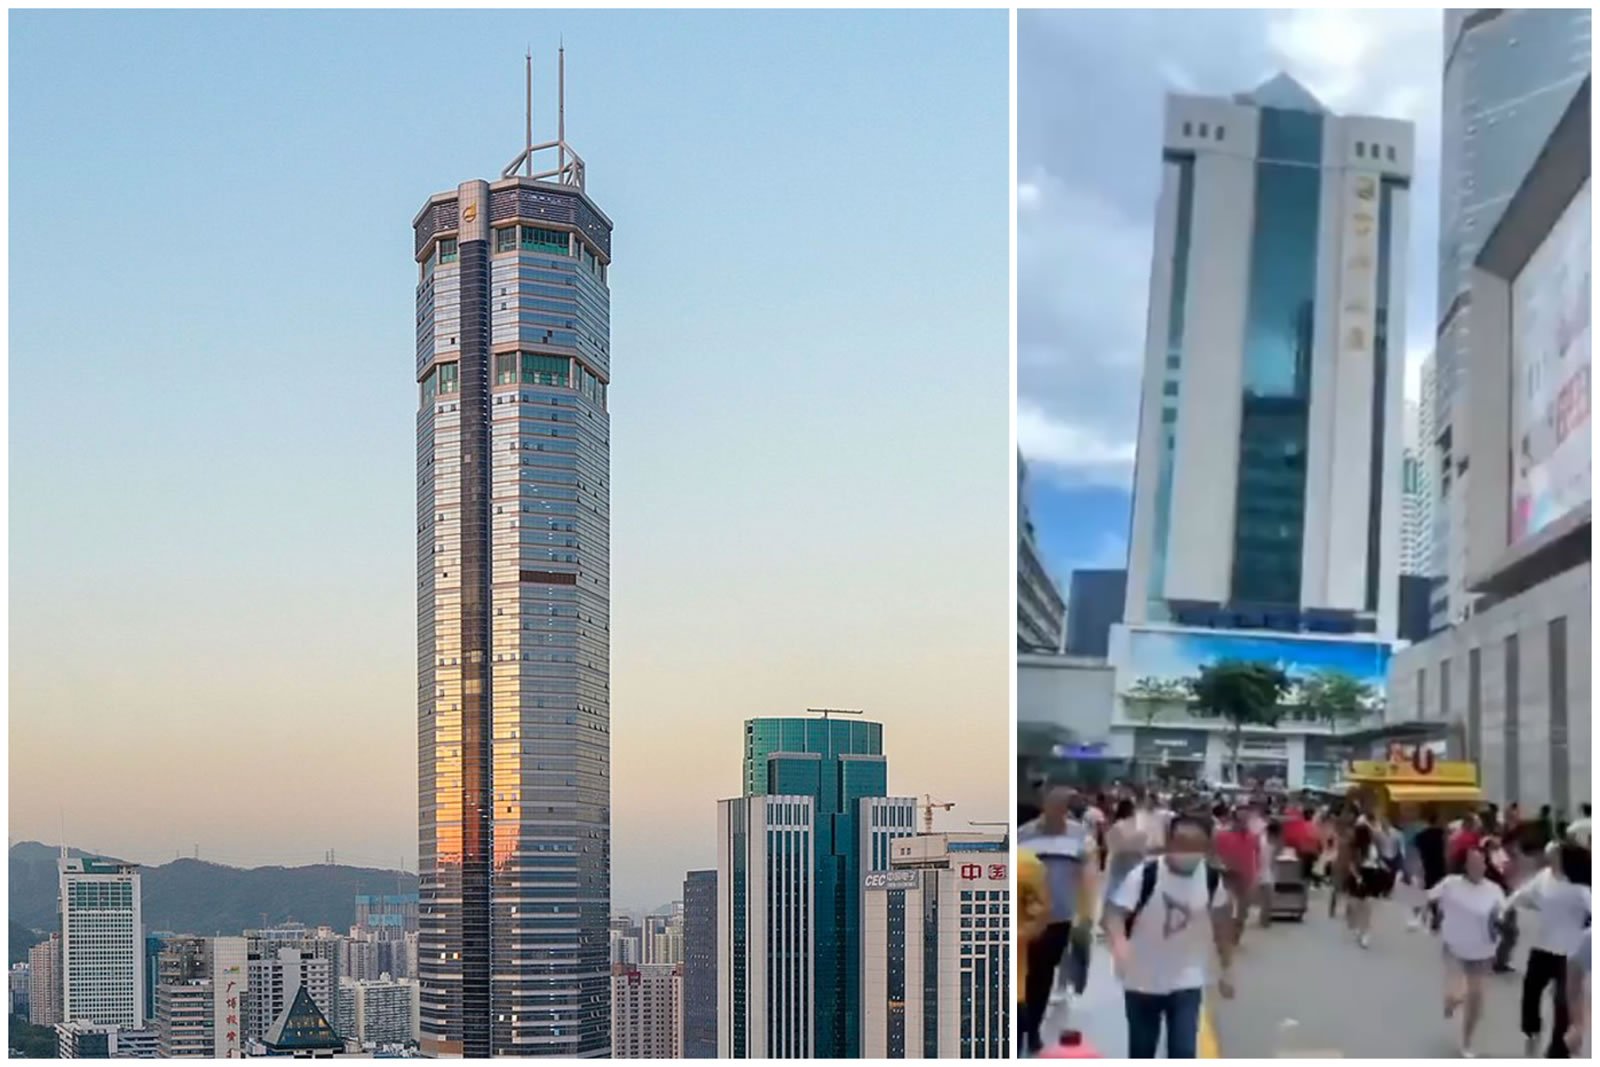 Not an Earthquake or a Typhoon and yet mysteriously one of China’s tallest skyscraper began to wobble violently. 15,000 people were frantically evacuated from the 70 storey tower.